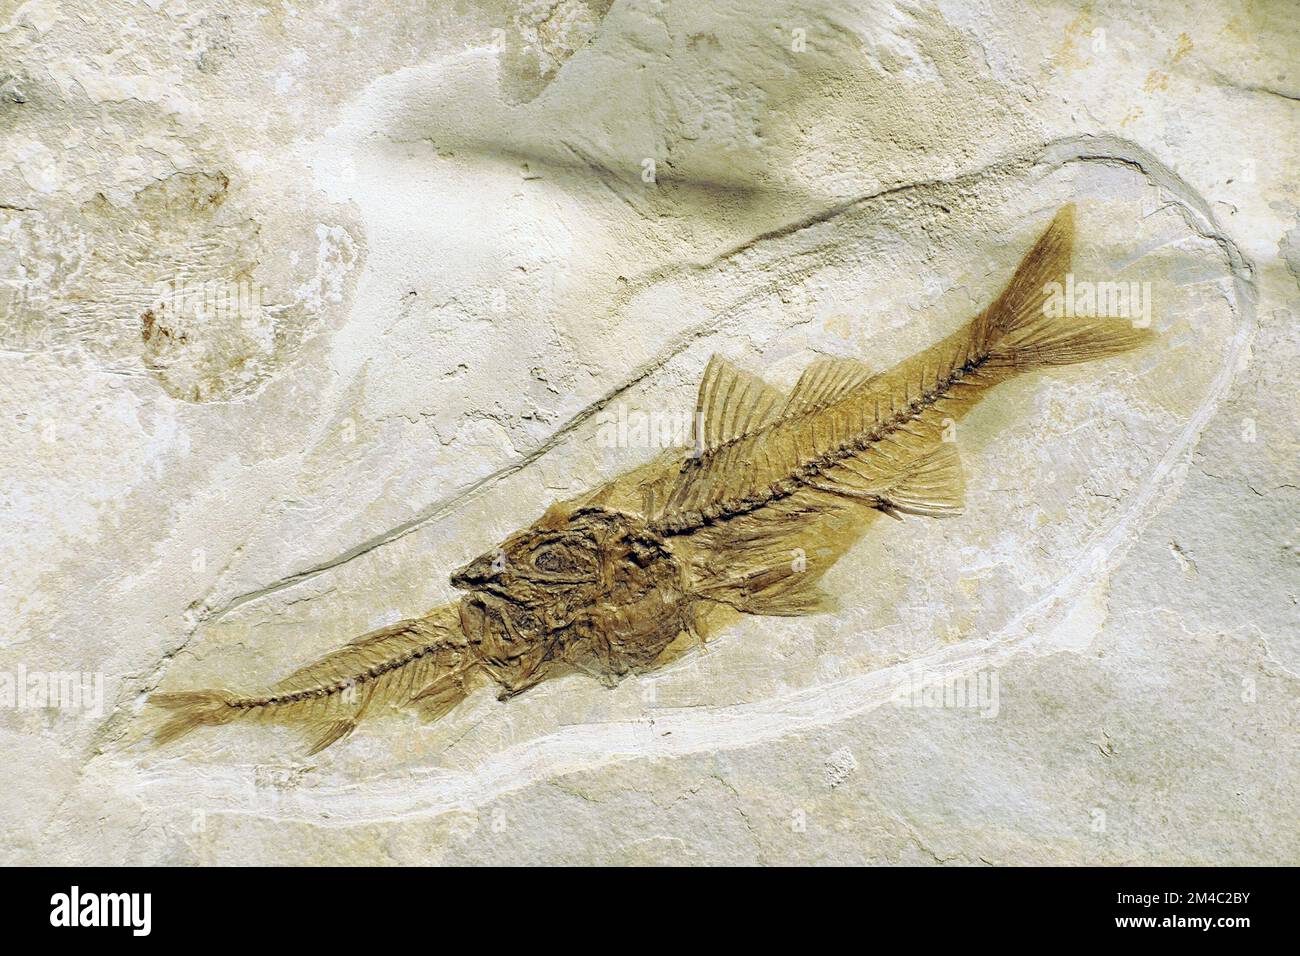 Depalis macrurus prehistoric fossilized fish eating other fish in stone detail Stock Photo